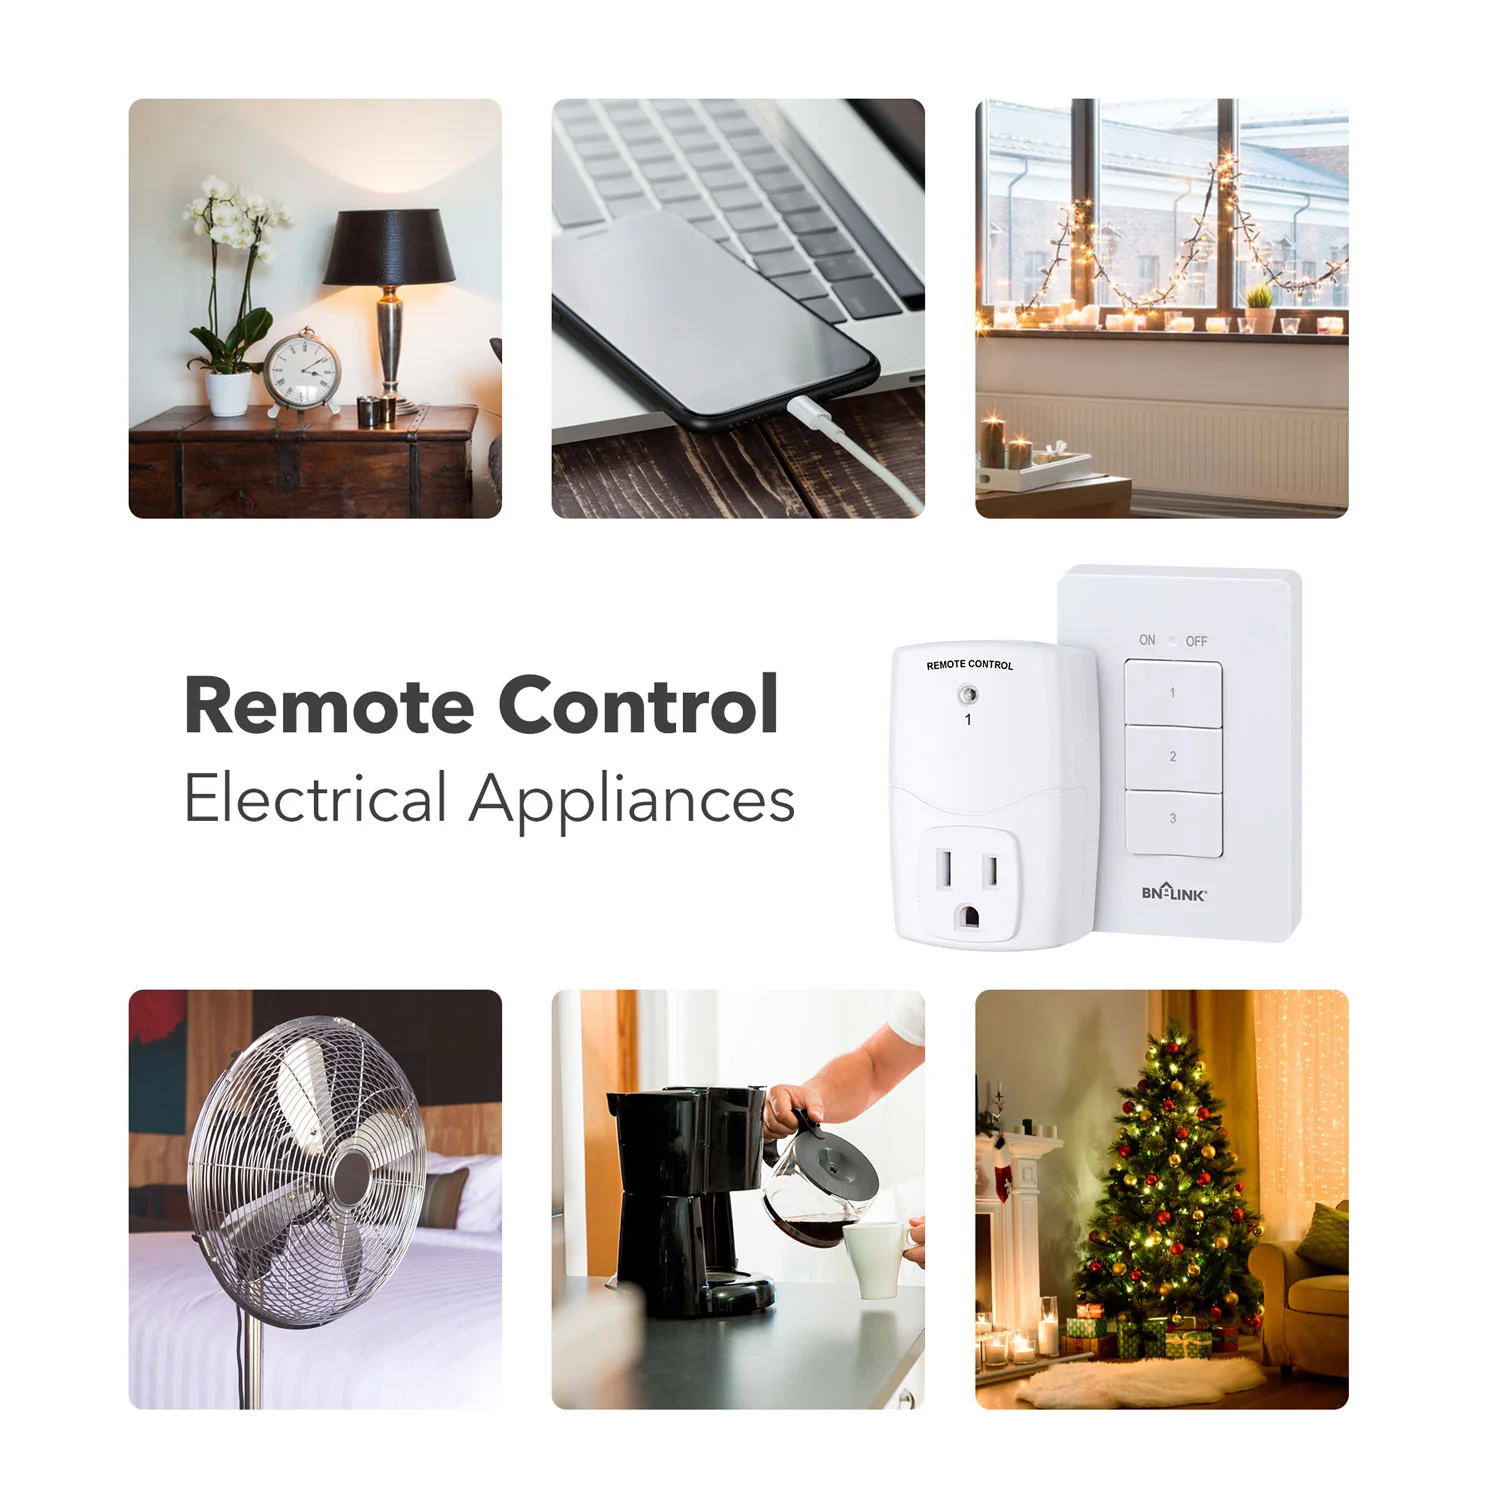 Modernize Your House or Company with the BN-LINK 3-Outlet Mini Wireless Wall-Mounted Remote Control